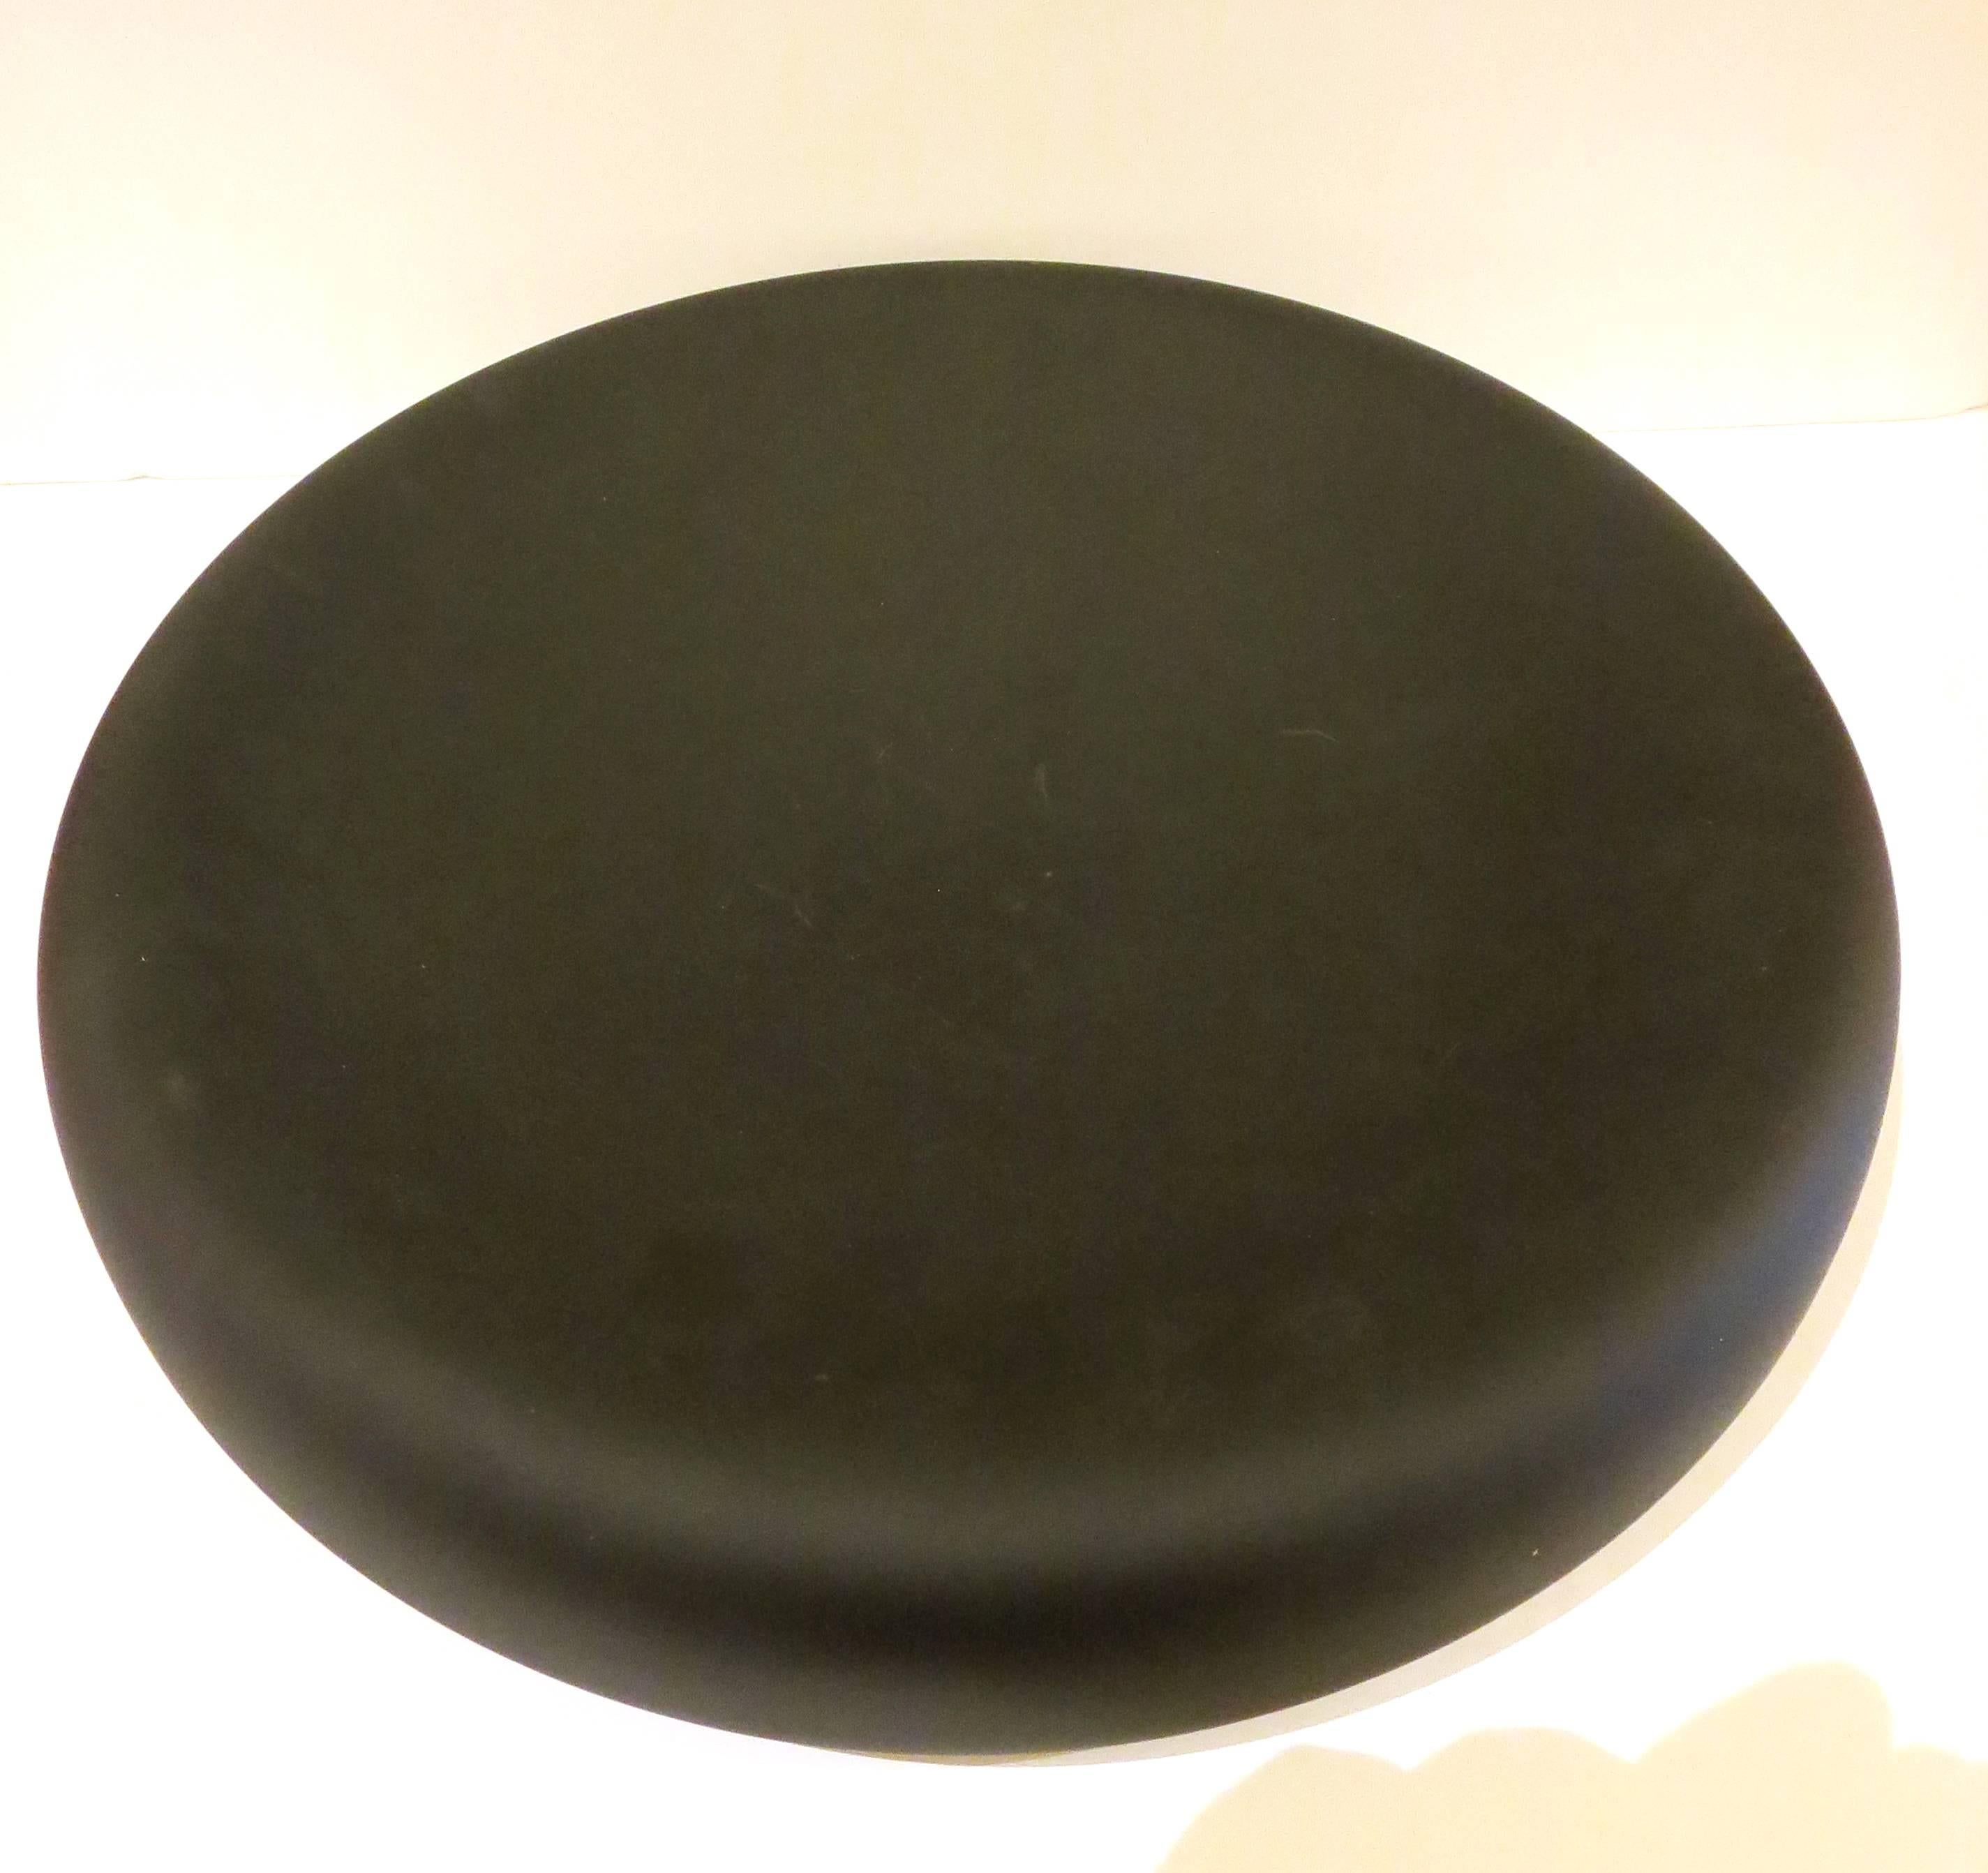 Incredible large frosted black satin compote bowl, with decorative object d’art, great as a center piece in a table, signed and retains its label, one of a kind piece.